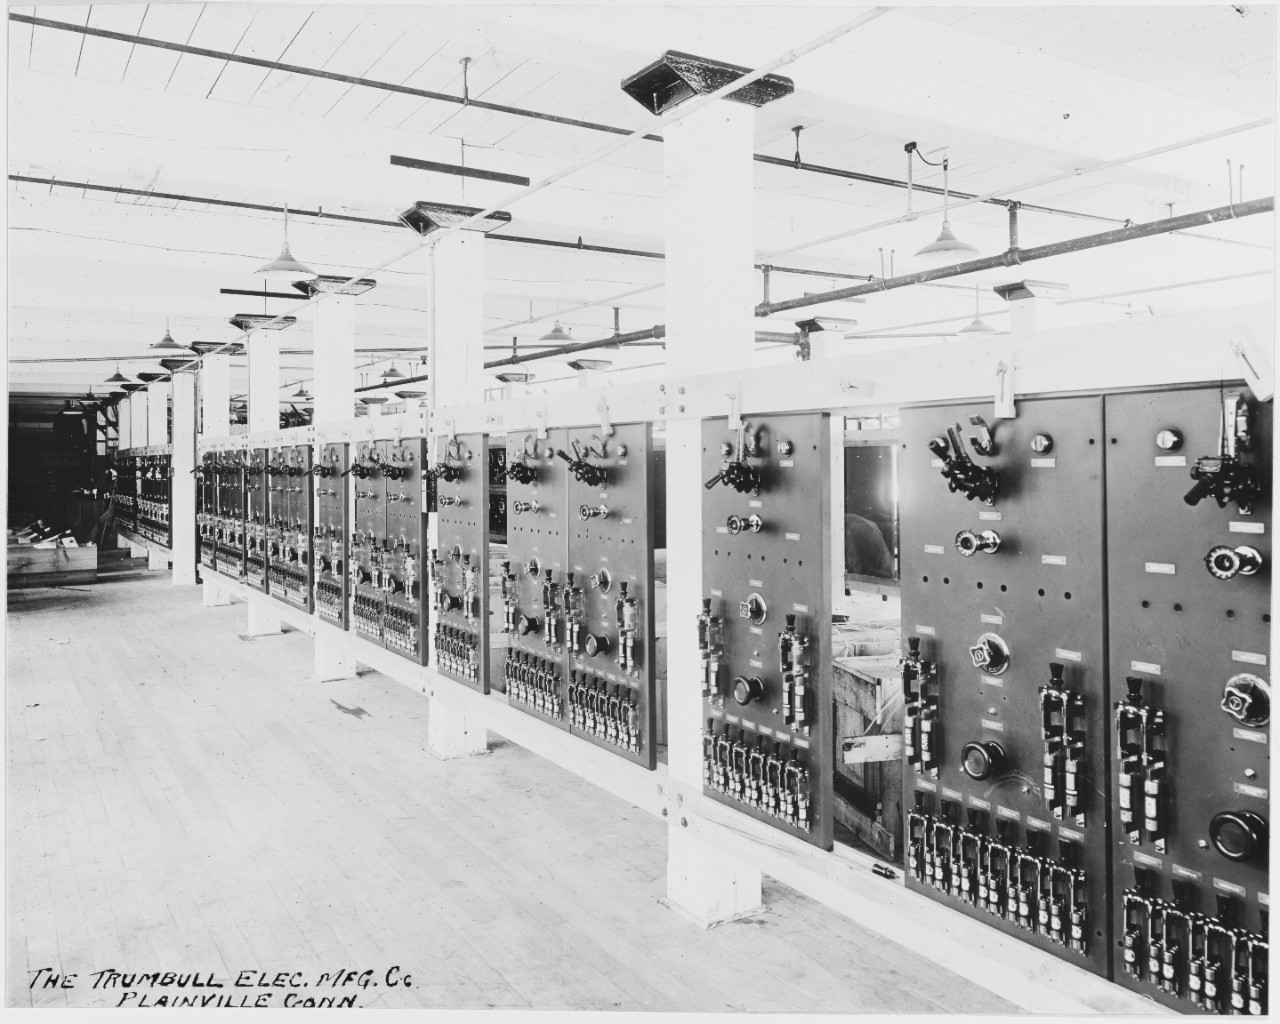 Switchboards by the Trumbull Electric Mfg. Co., Plainville, Connecticut.